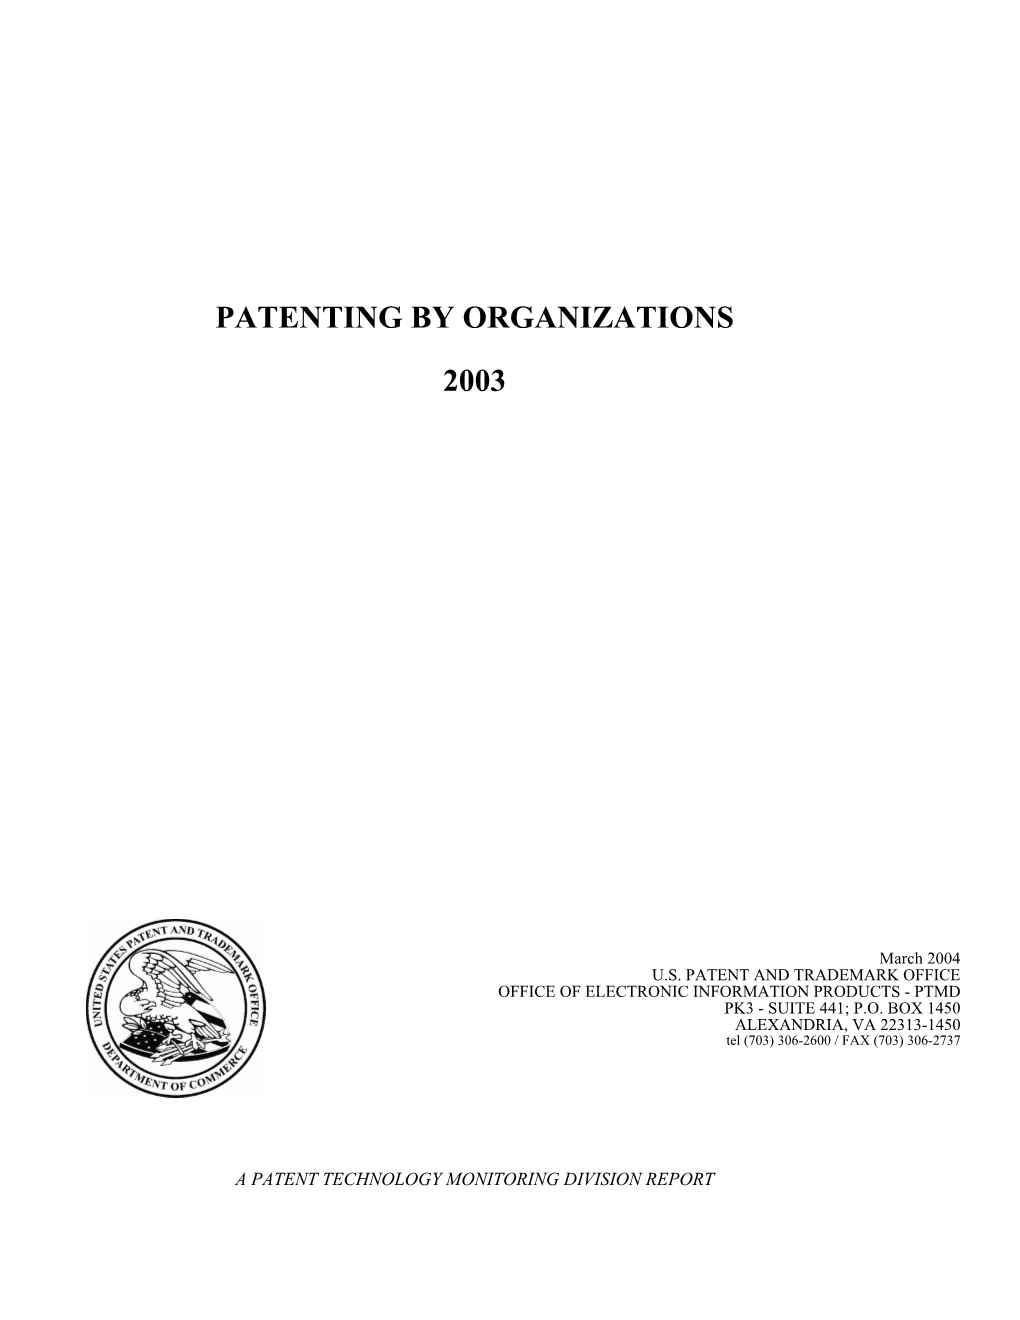 Patenting by Organizations 2003